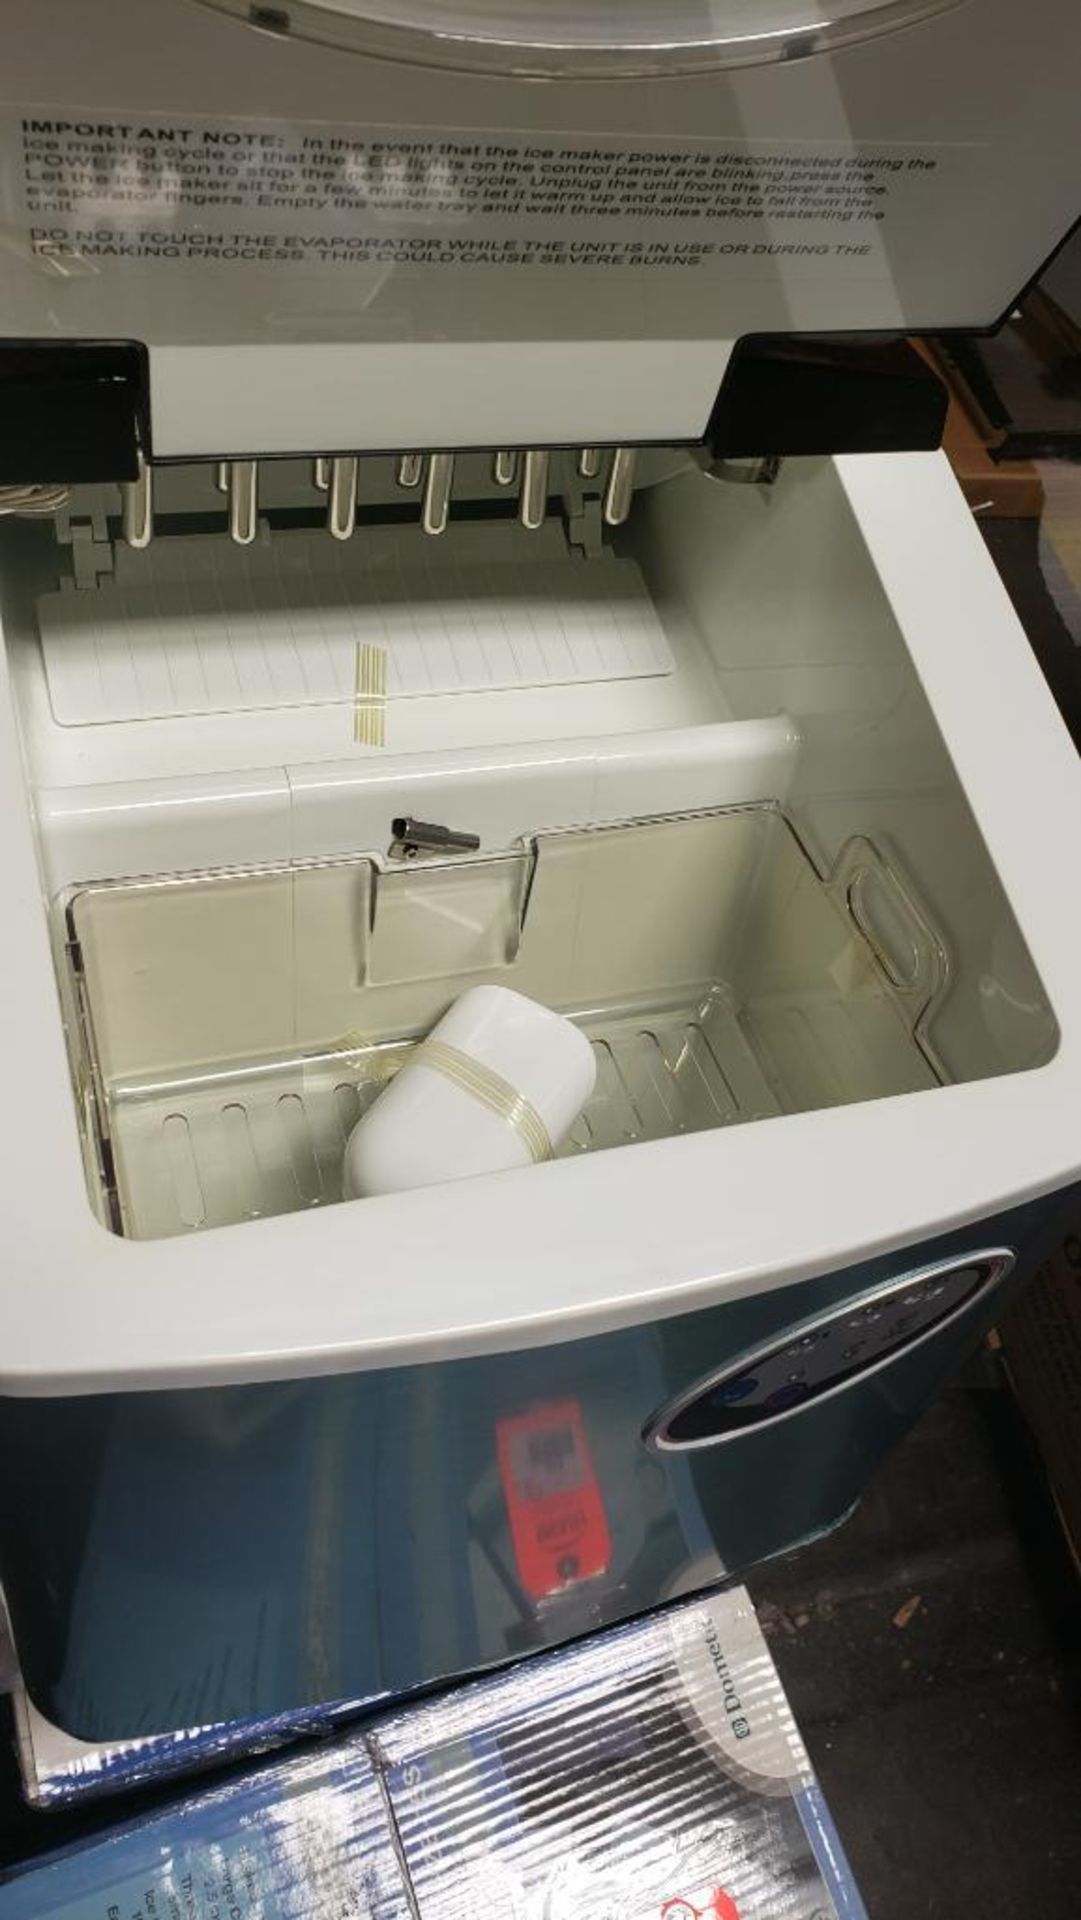 Qty 2 - Dometic counter top icemaker. Model HZB-15S. New in box. - Image 4 of 4